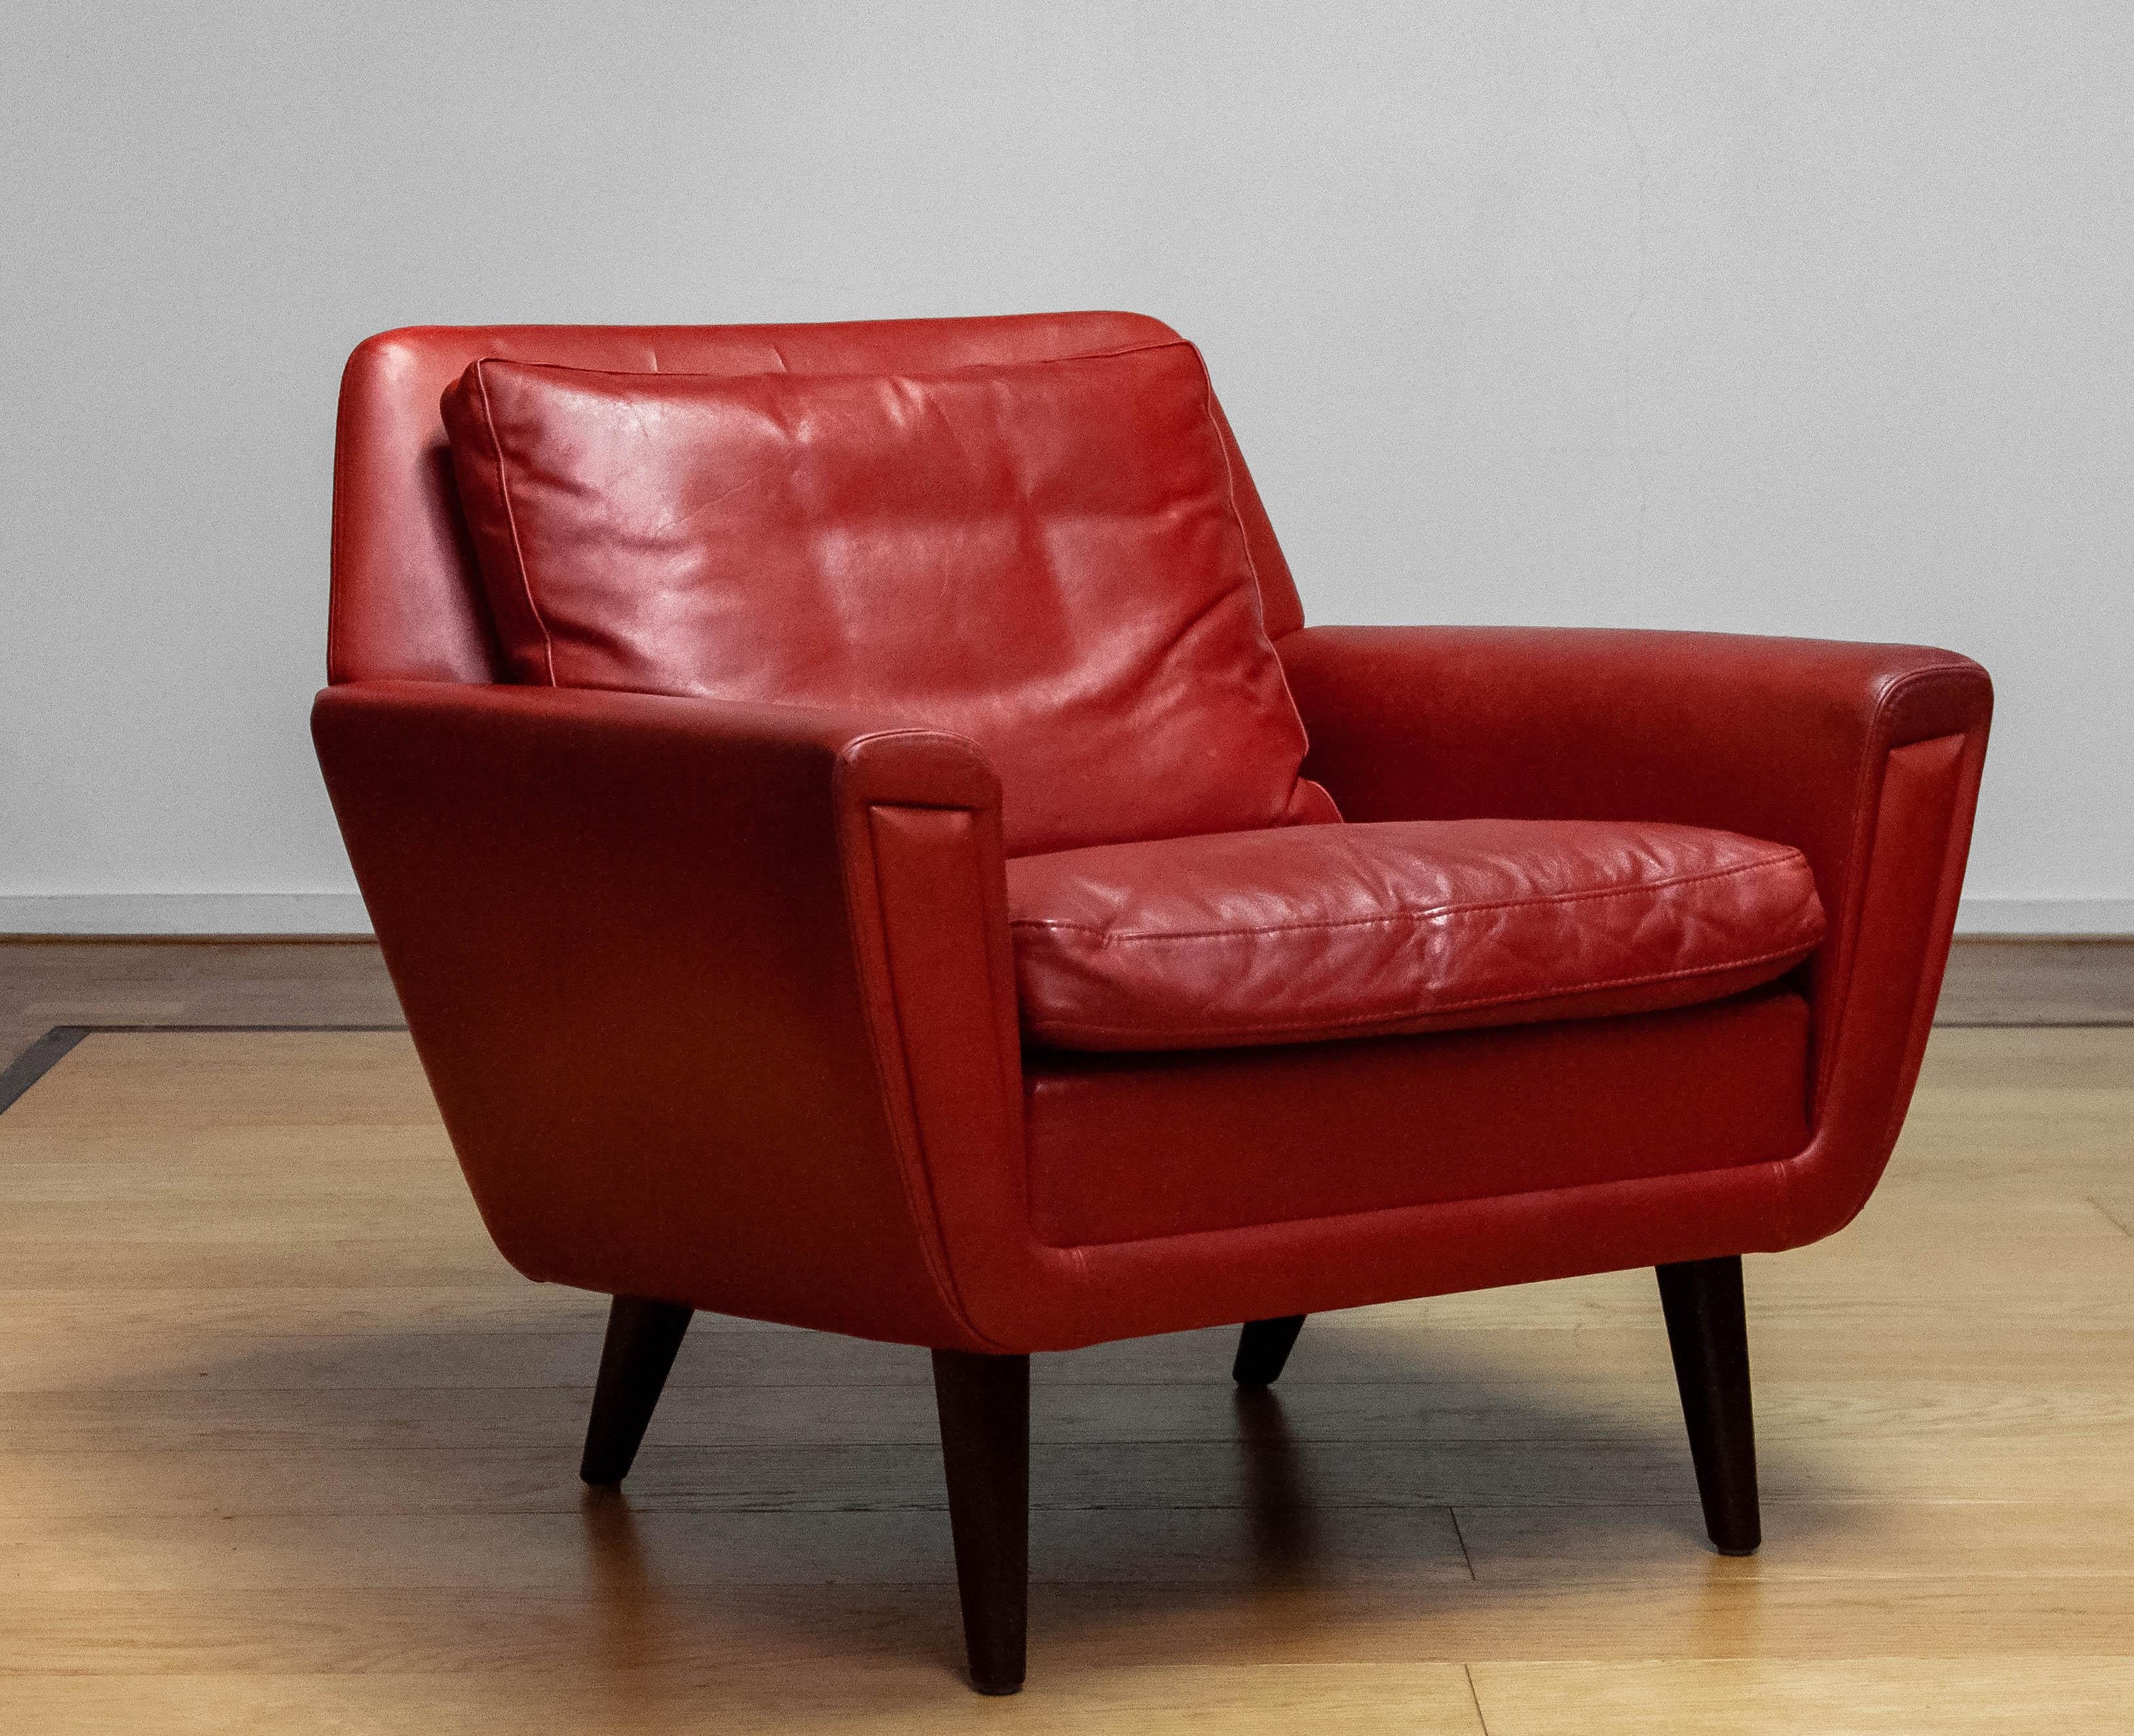 Nice 1960s  lounge / easy chair made in Denmark 
This chair is upholstered with red leather and stands on beech legs.
The seat and also the backrest have some stains, see the detailed photos.
Technically the chair is in a good and comfortable